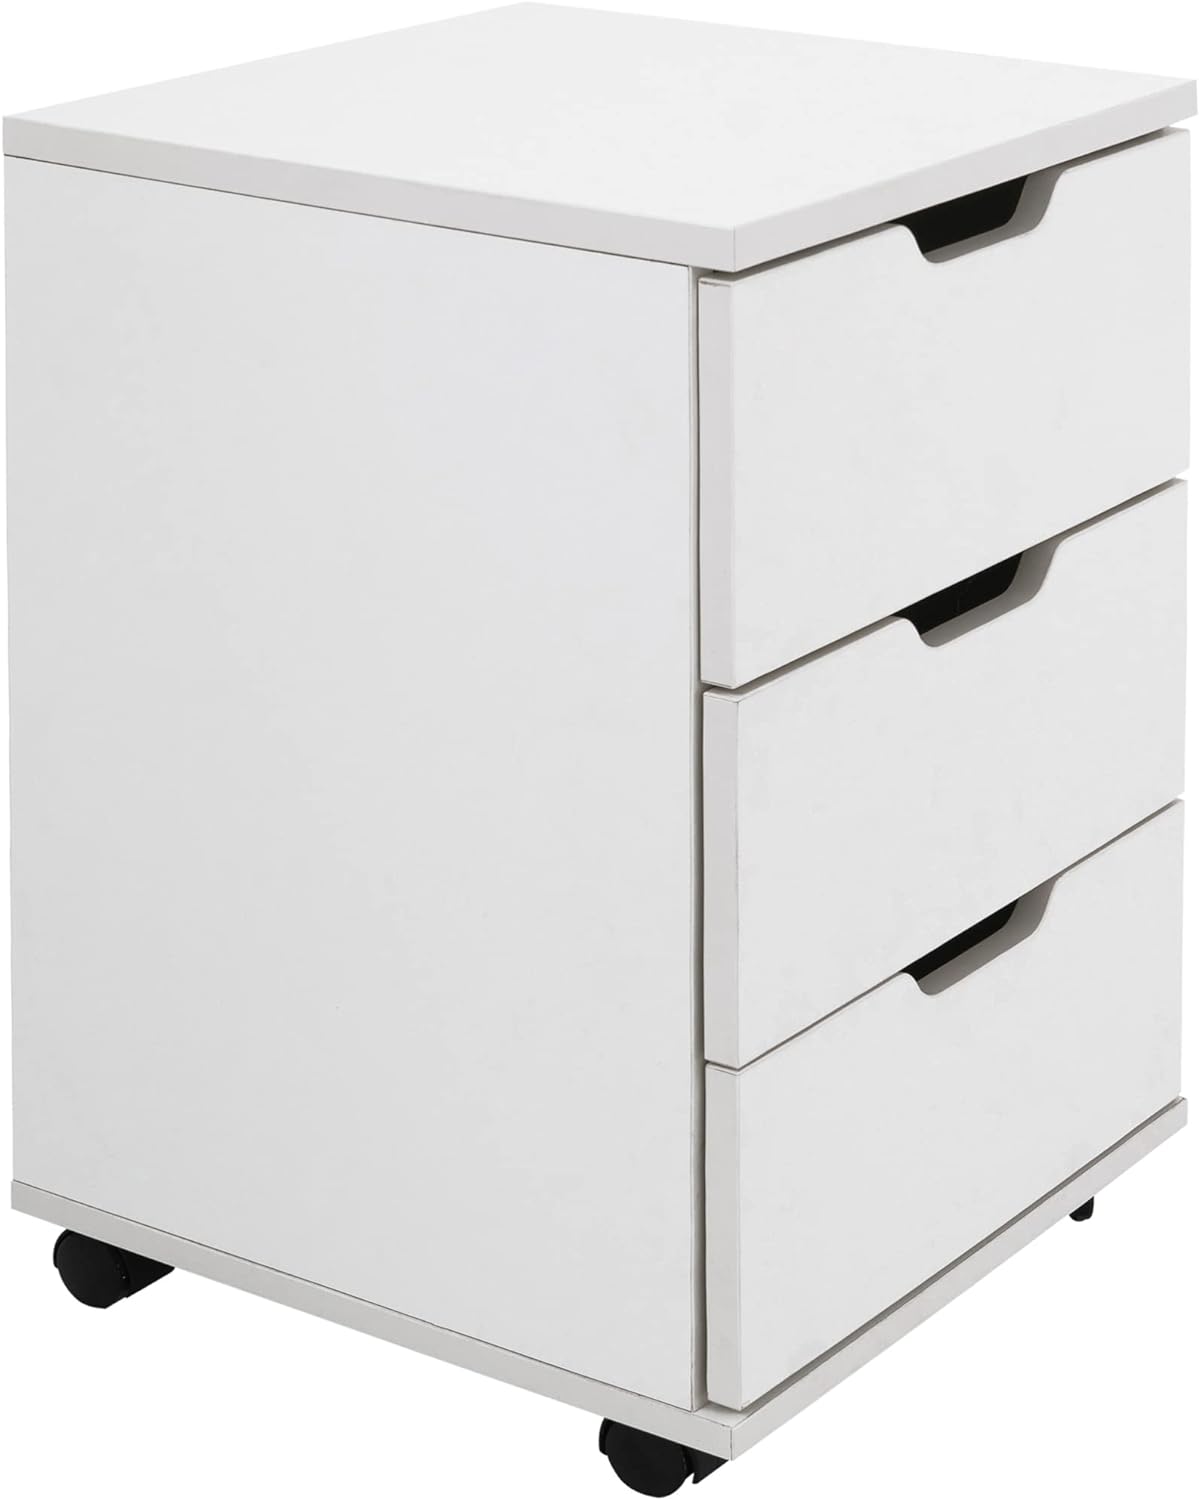 Generic Sunon 3-Drawer Vertical Filing Cabinet Rolling Wood Mobile File Cabinets Under Desk for Home Office with Casters (White, Non-As